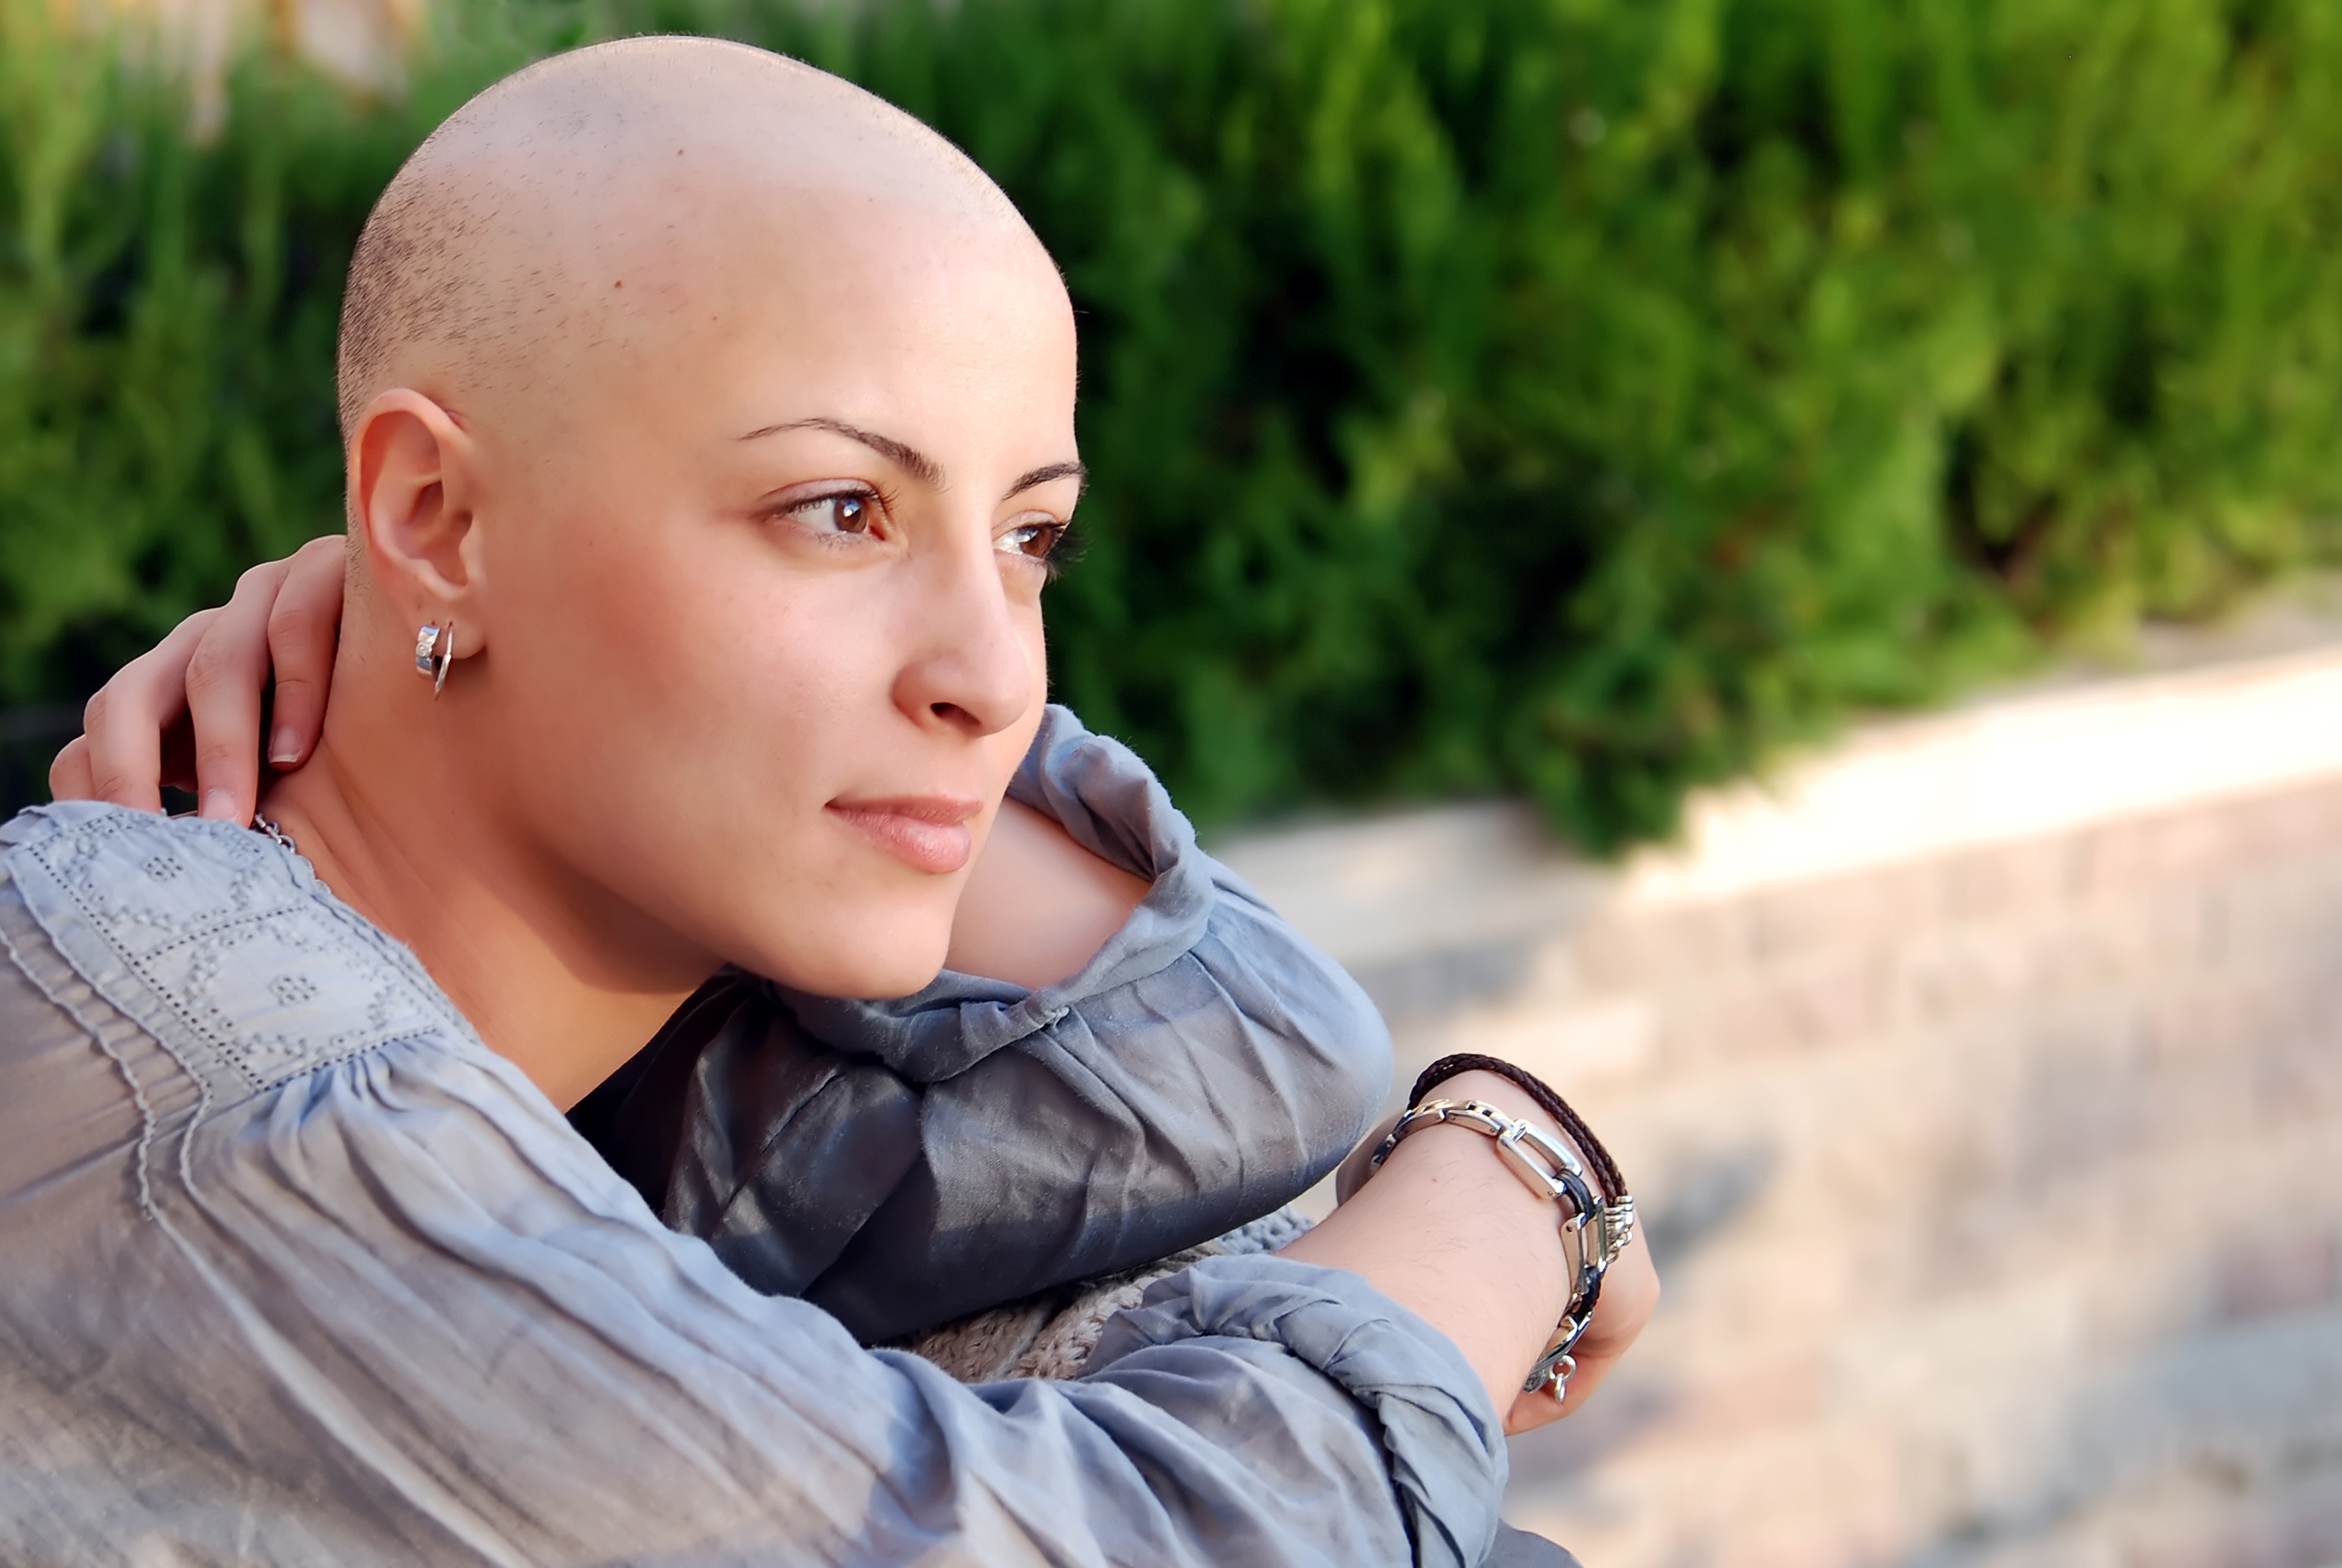 Prominent cancers that affect women’s health